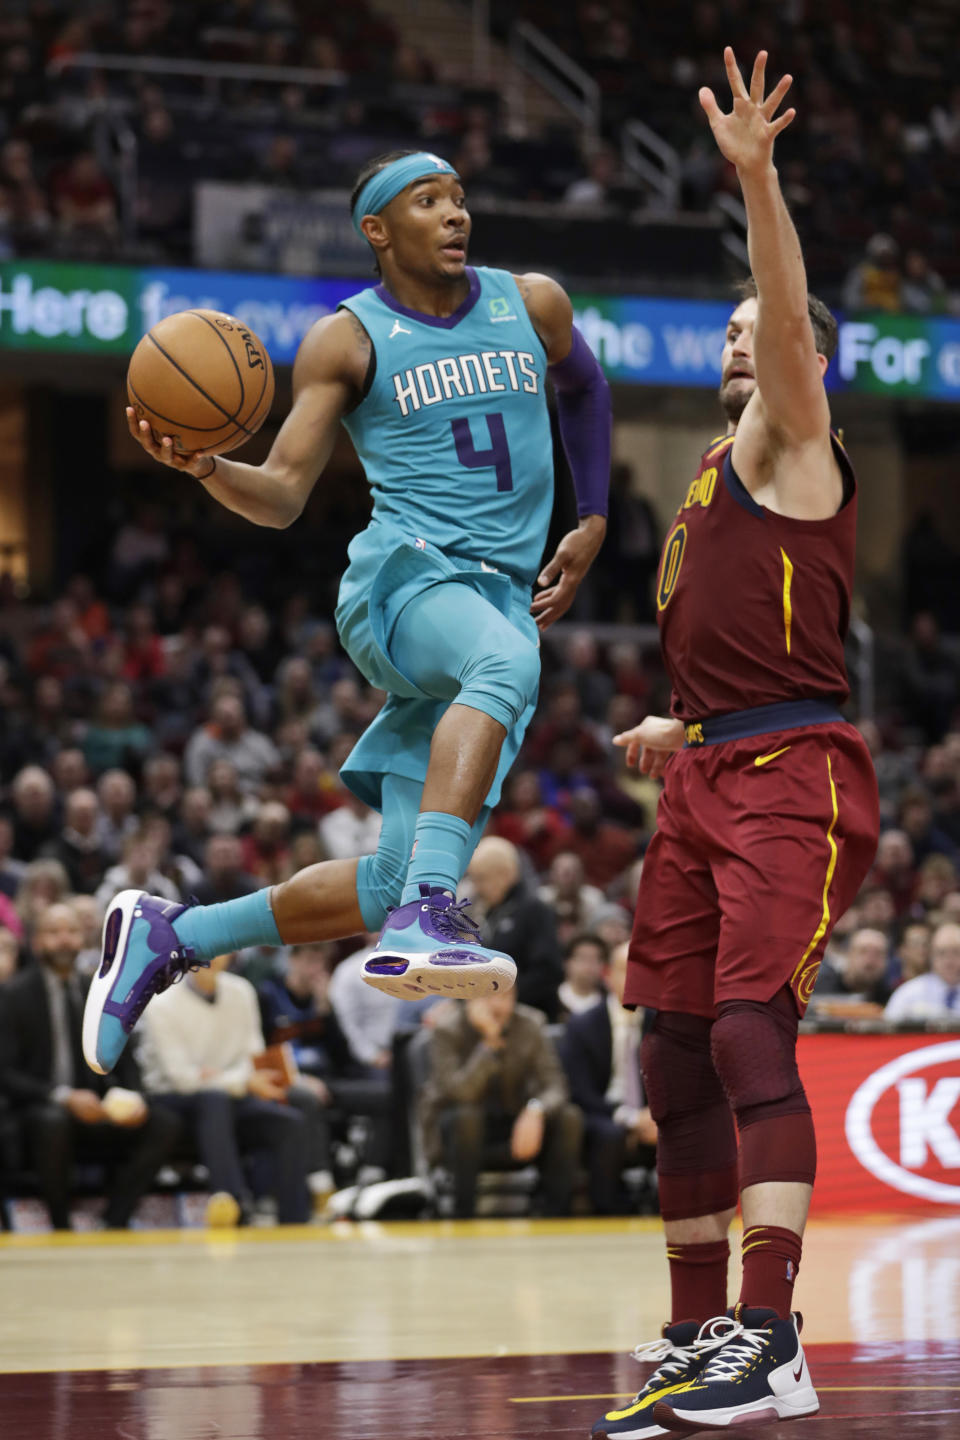 Charlotte Hornets' Devonte' Graham (4) looks to pass against Cleveland Cavaliers' Kevin Love (0) in the second half of an NBA basketball game, Thursday, Jan. 2, 2020, in Cleveland. (AP Photo/Tony Dejak)